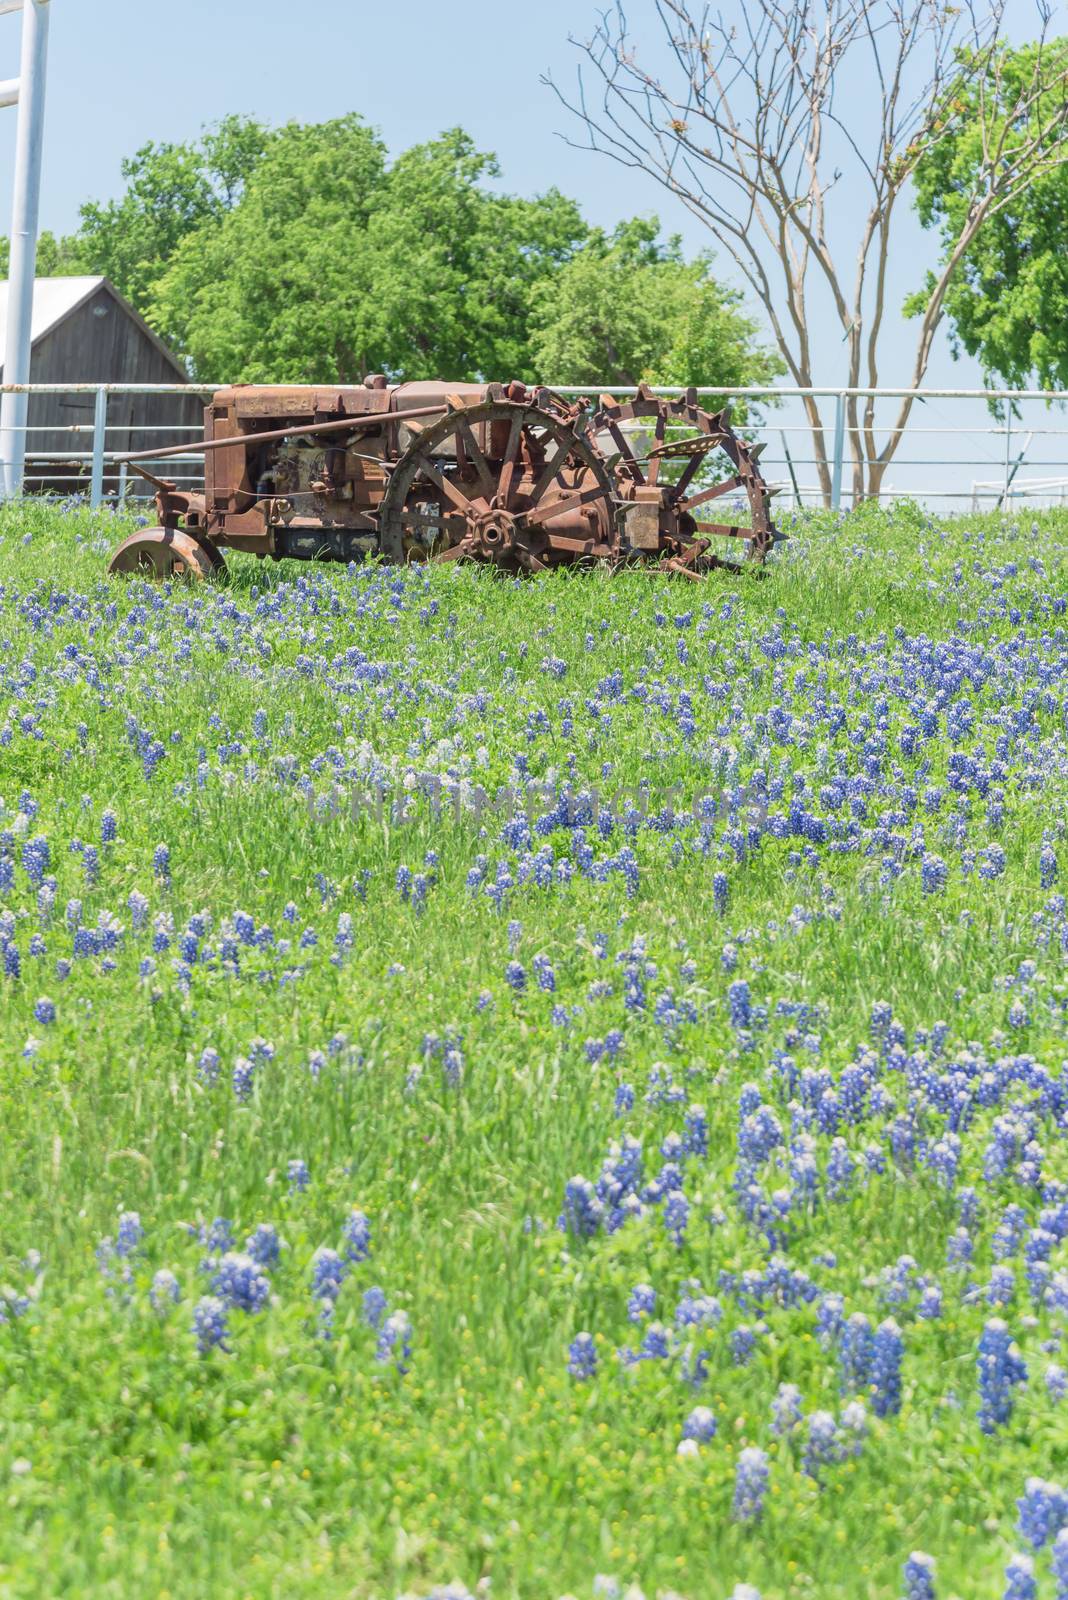 Old tractor and Bluebonnet blossom at rural farm in Bristol, Texas, USA. Wildflower blooming in meadow with rustic wagon, countryside landscape